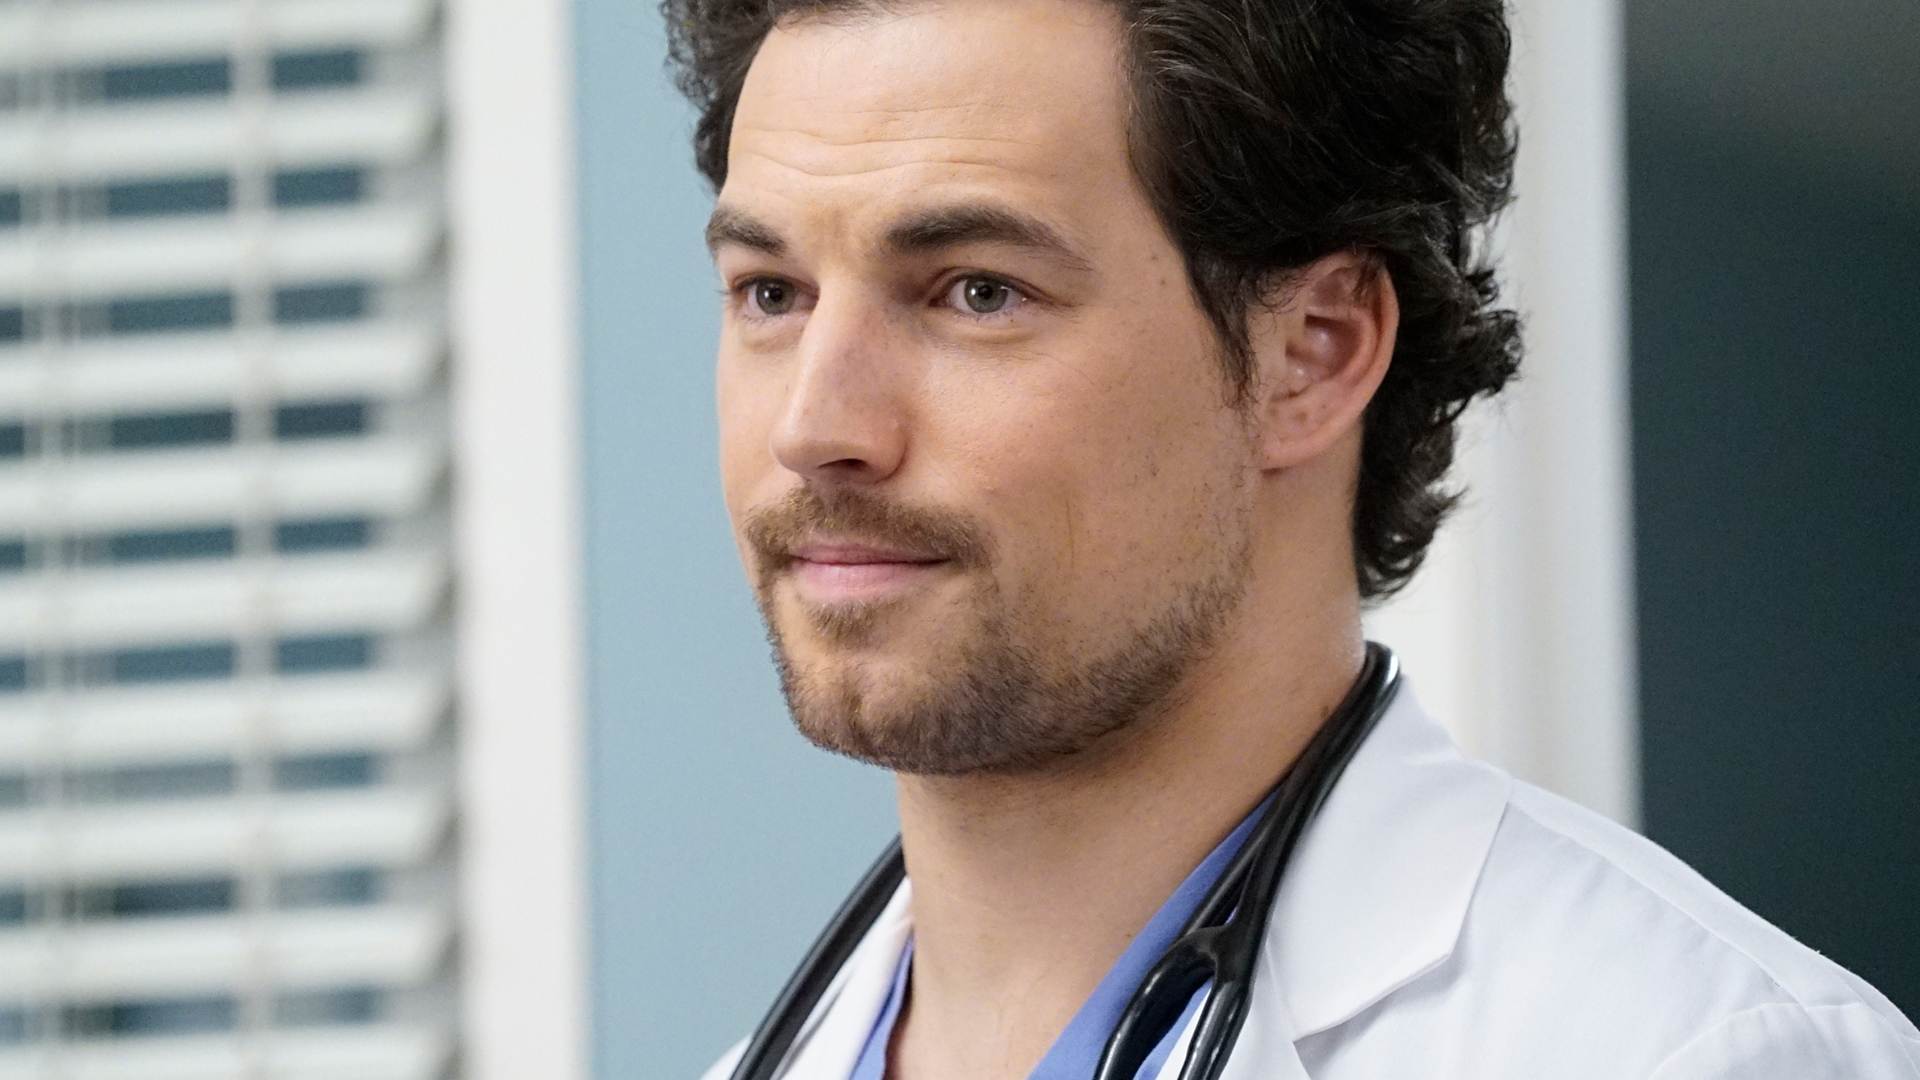 A Picture of DeLuca from Grey's Anatomy